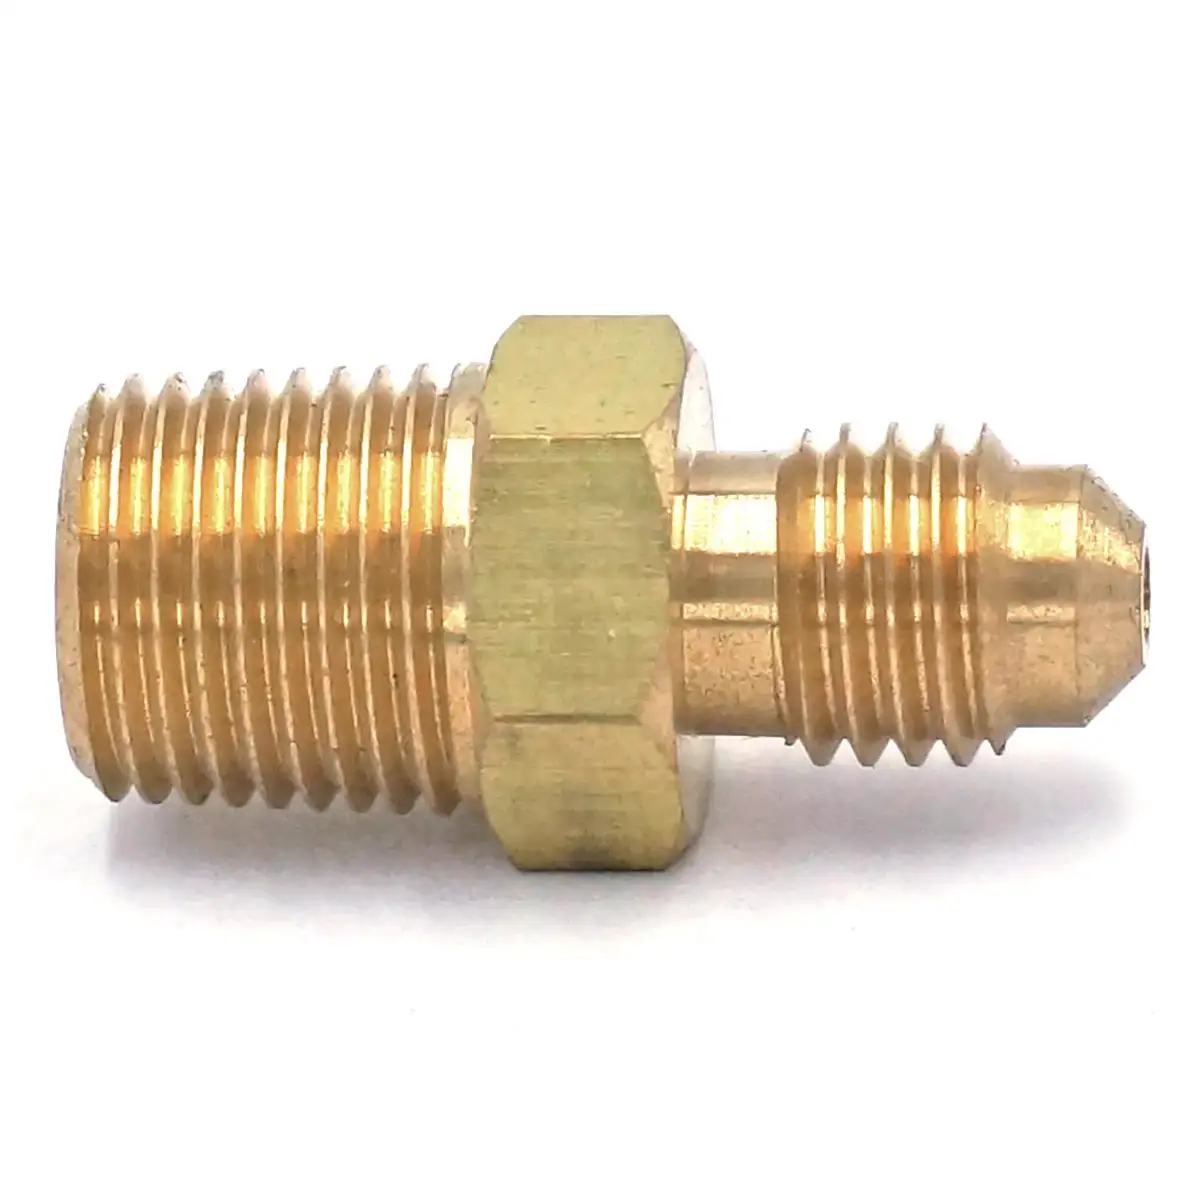 qty400 Push-in Plugs for SAE and NPT Threads Push in Plug for 1-5/16 SAE Or 1 NPT Threads LDPE Red MOCAP PIP1313RD1